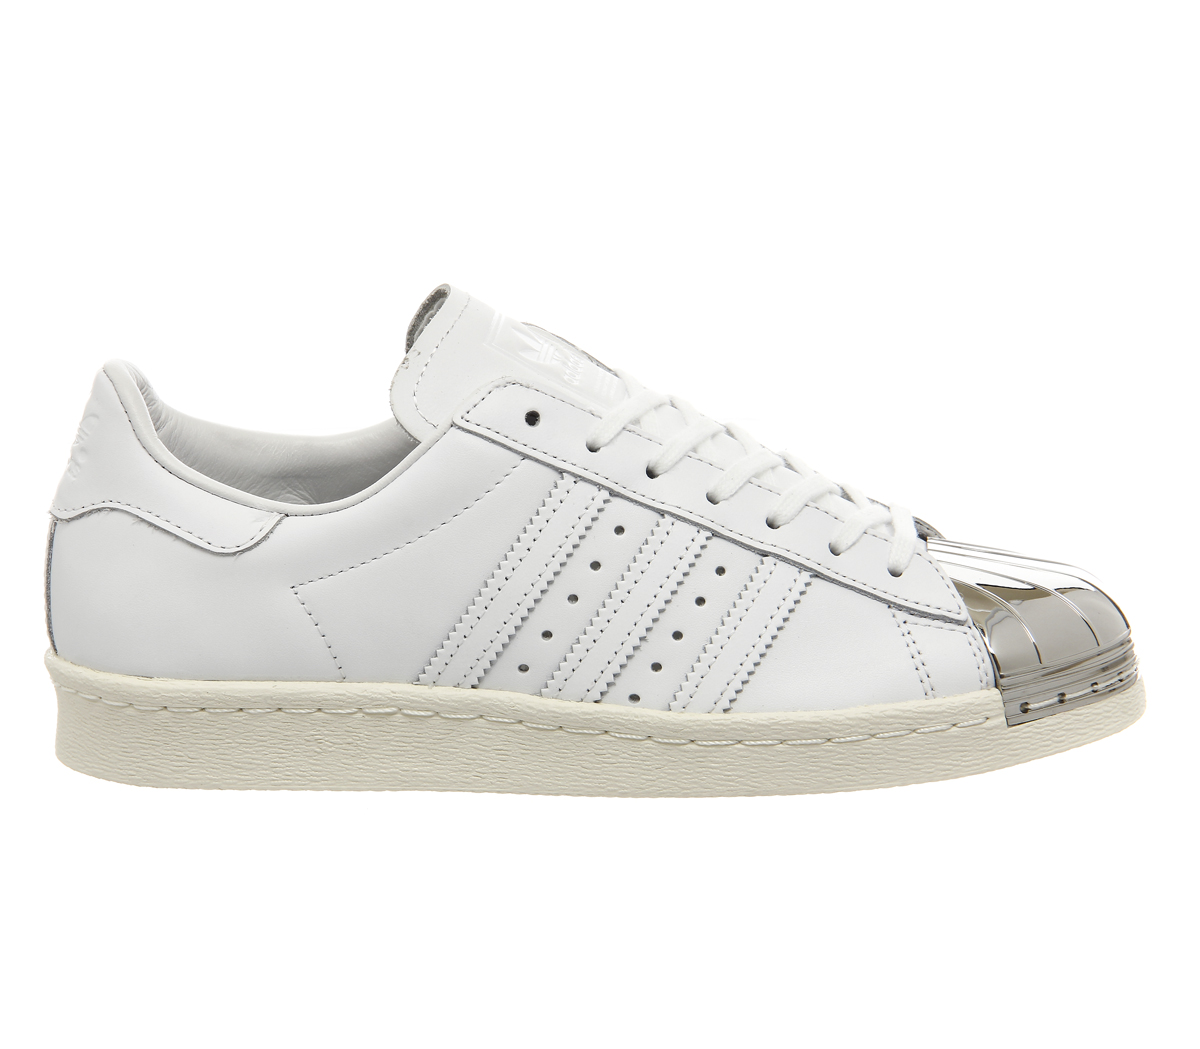 adidas Superstar 80's Metal Toe Trainers White White Silver Metal Toe ...